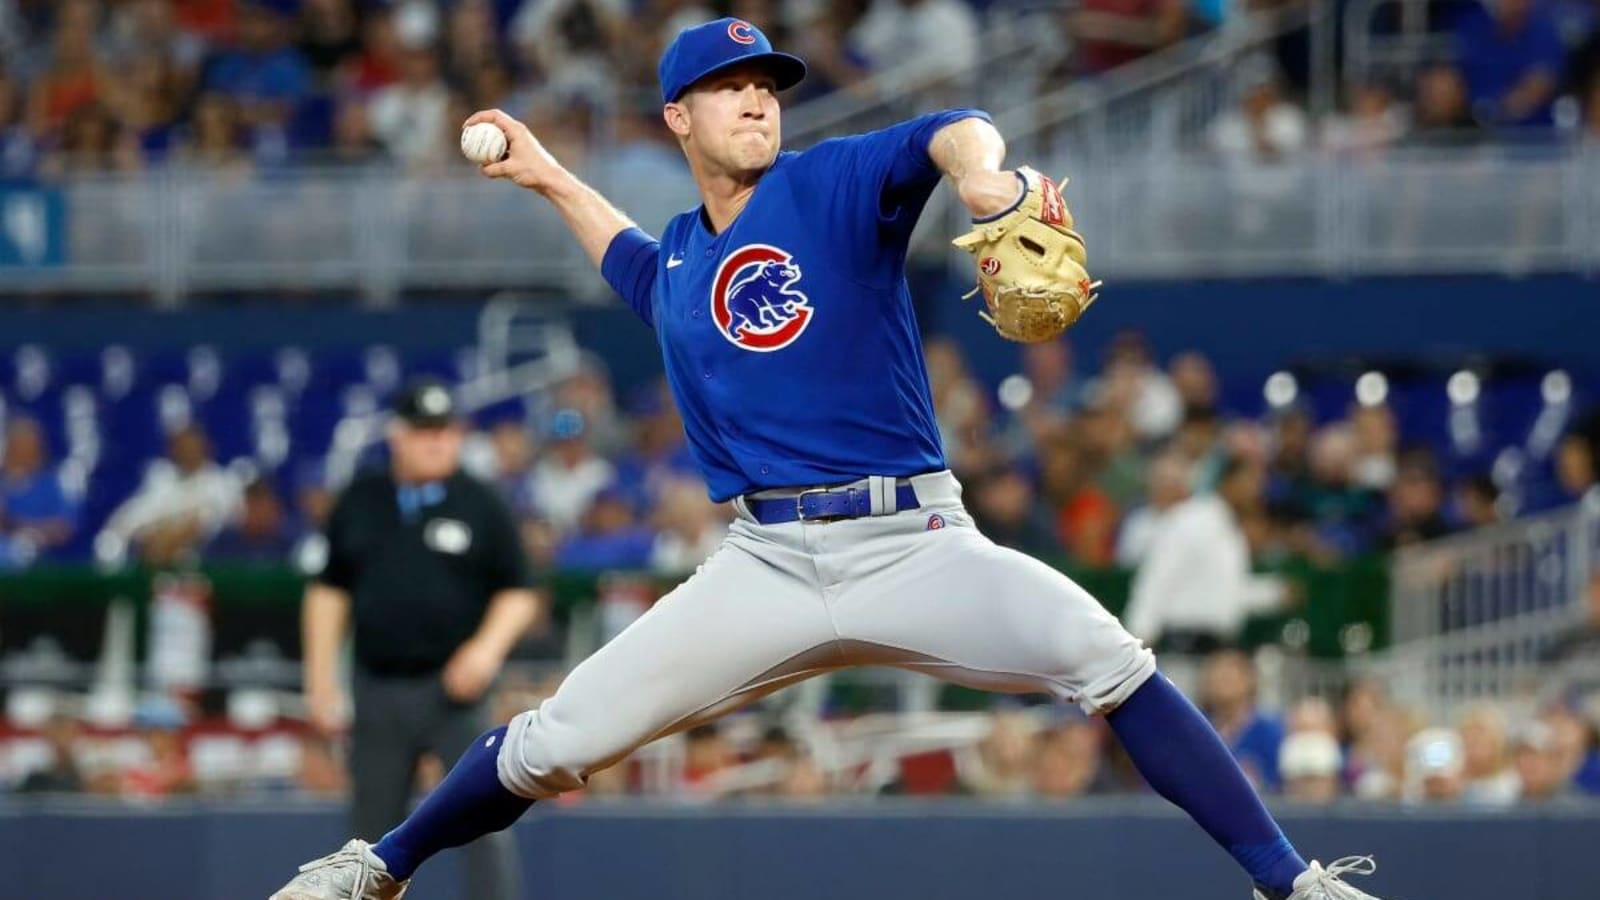 Cubs Prospect Throwing Well at Iowa